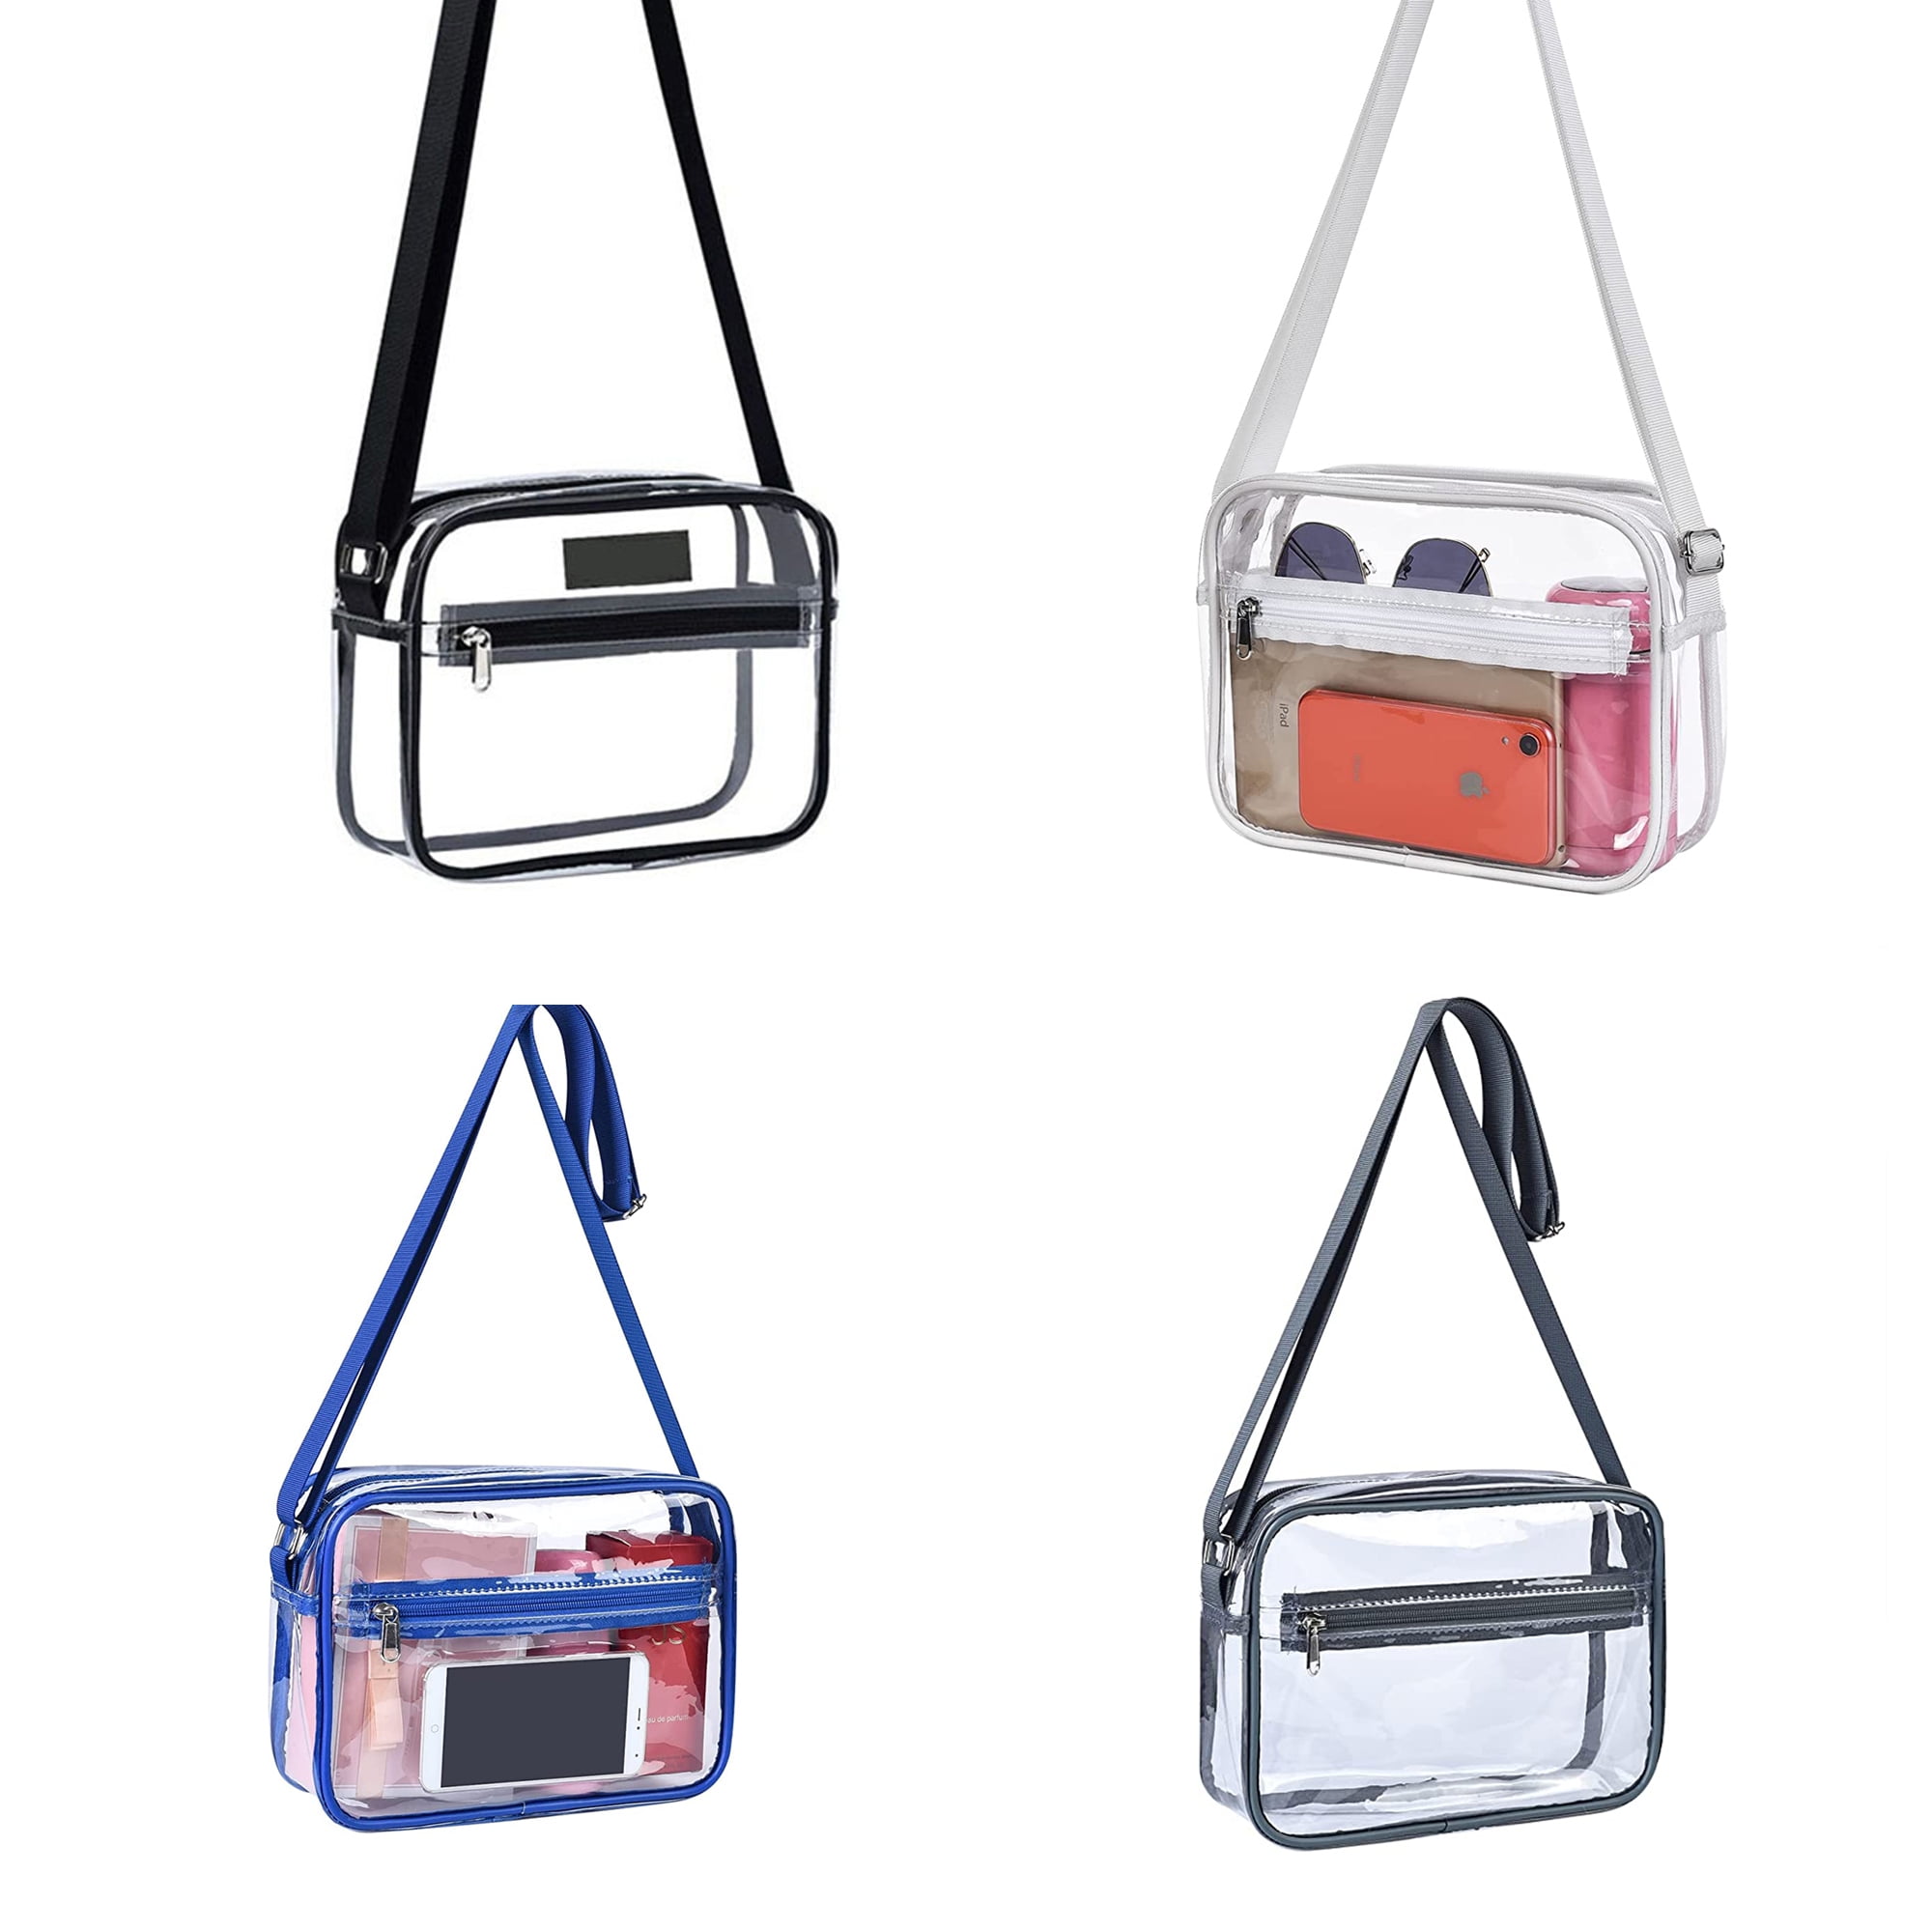 Vogewood Initial Clear Crossbody Bag Stadium Approved Under 12x6x12  Transparent Handbag With Monogram Letters